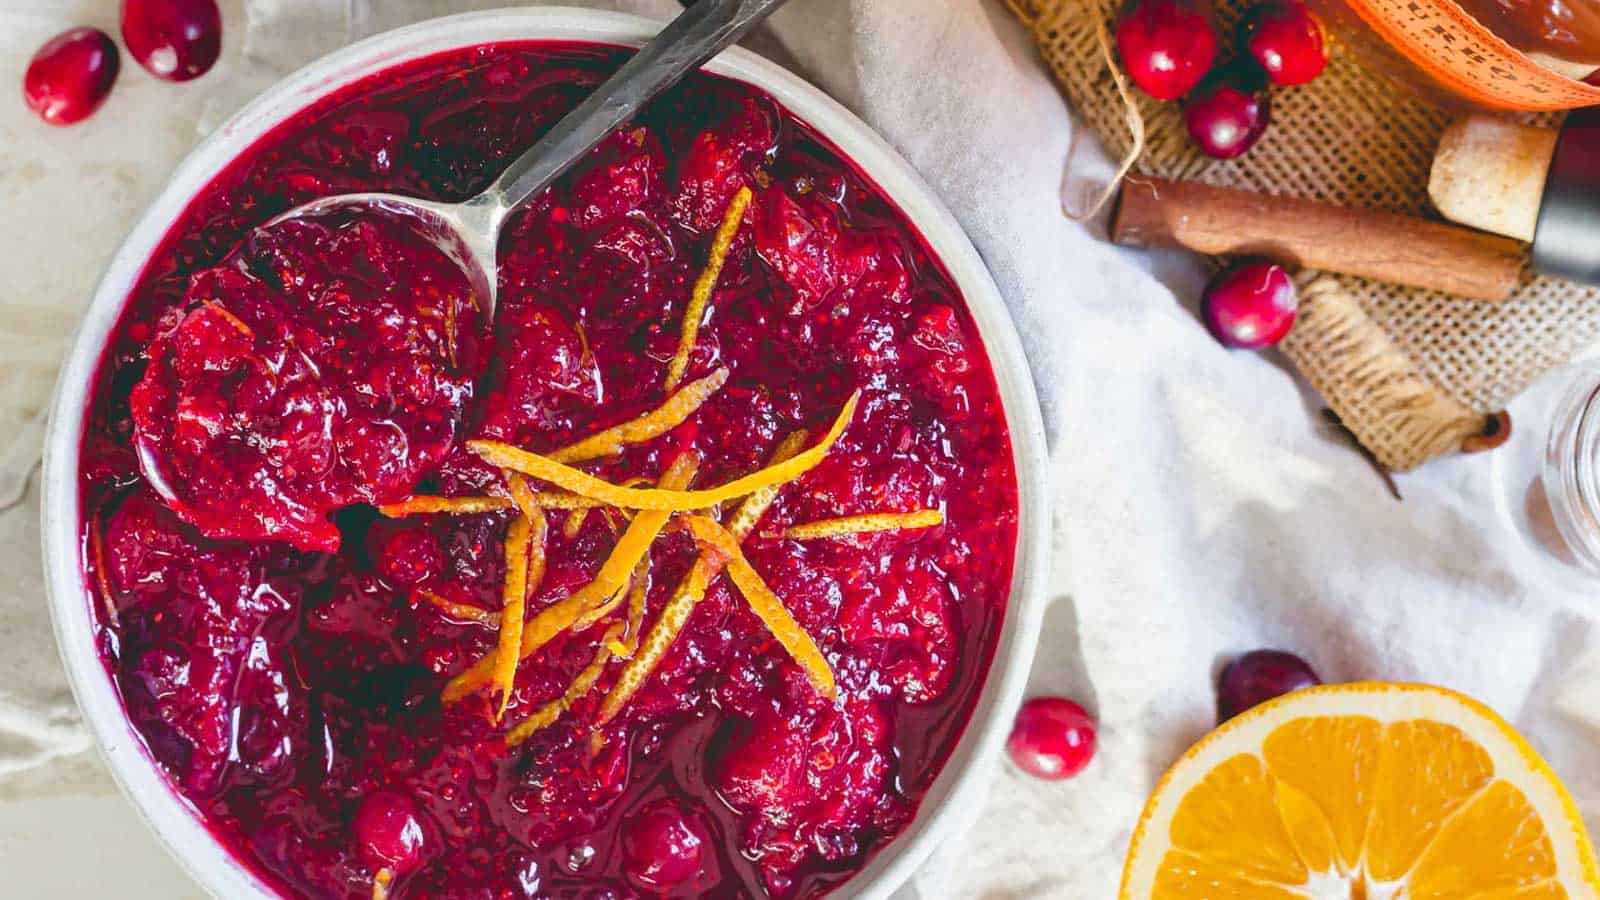 Bourbon cranberry sauce in a white bowl with orange slices.